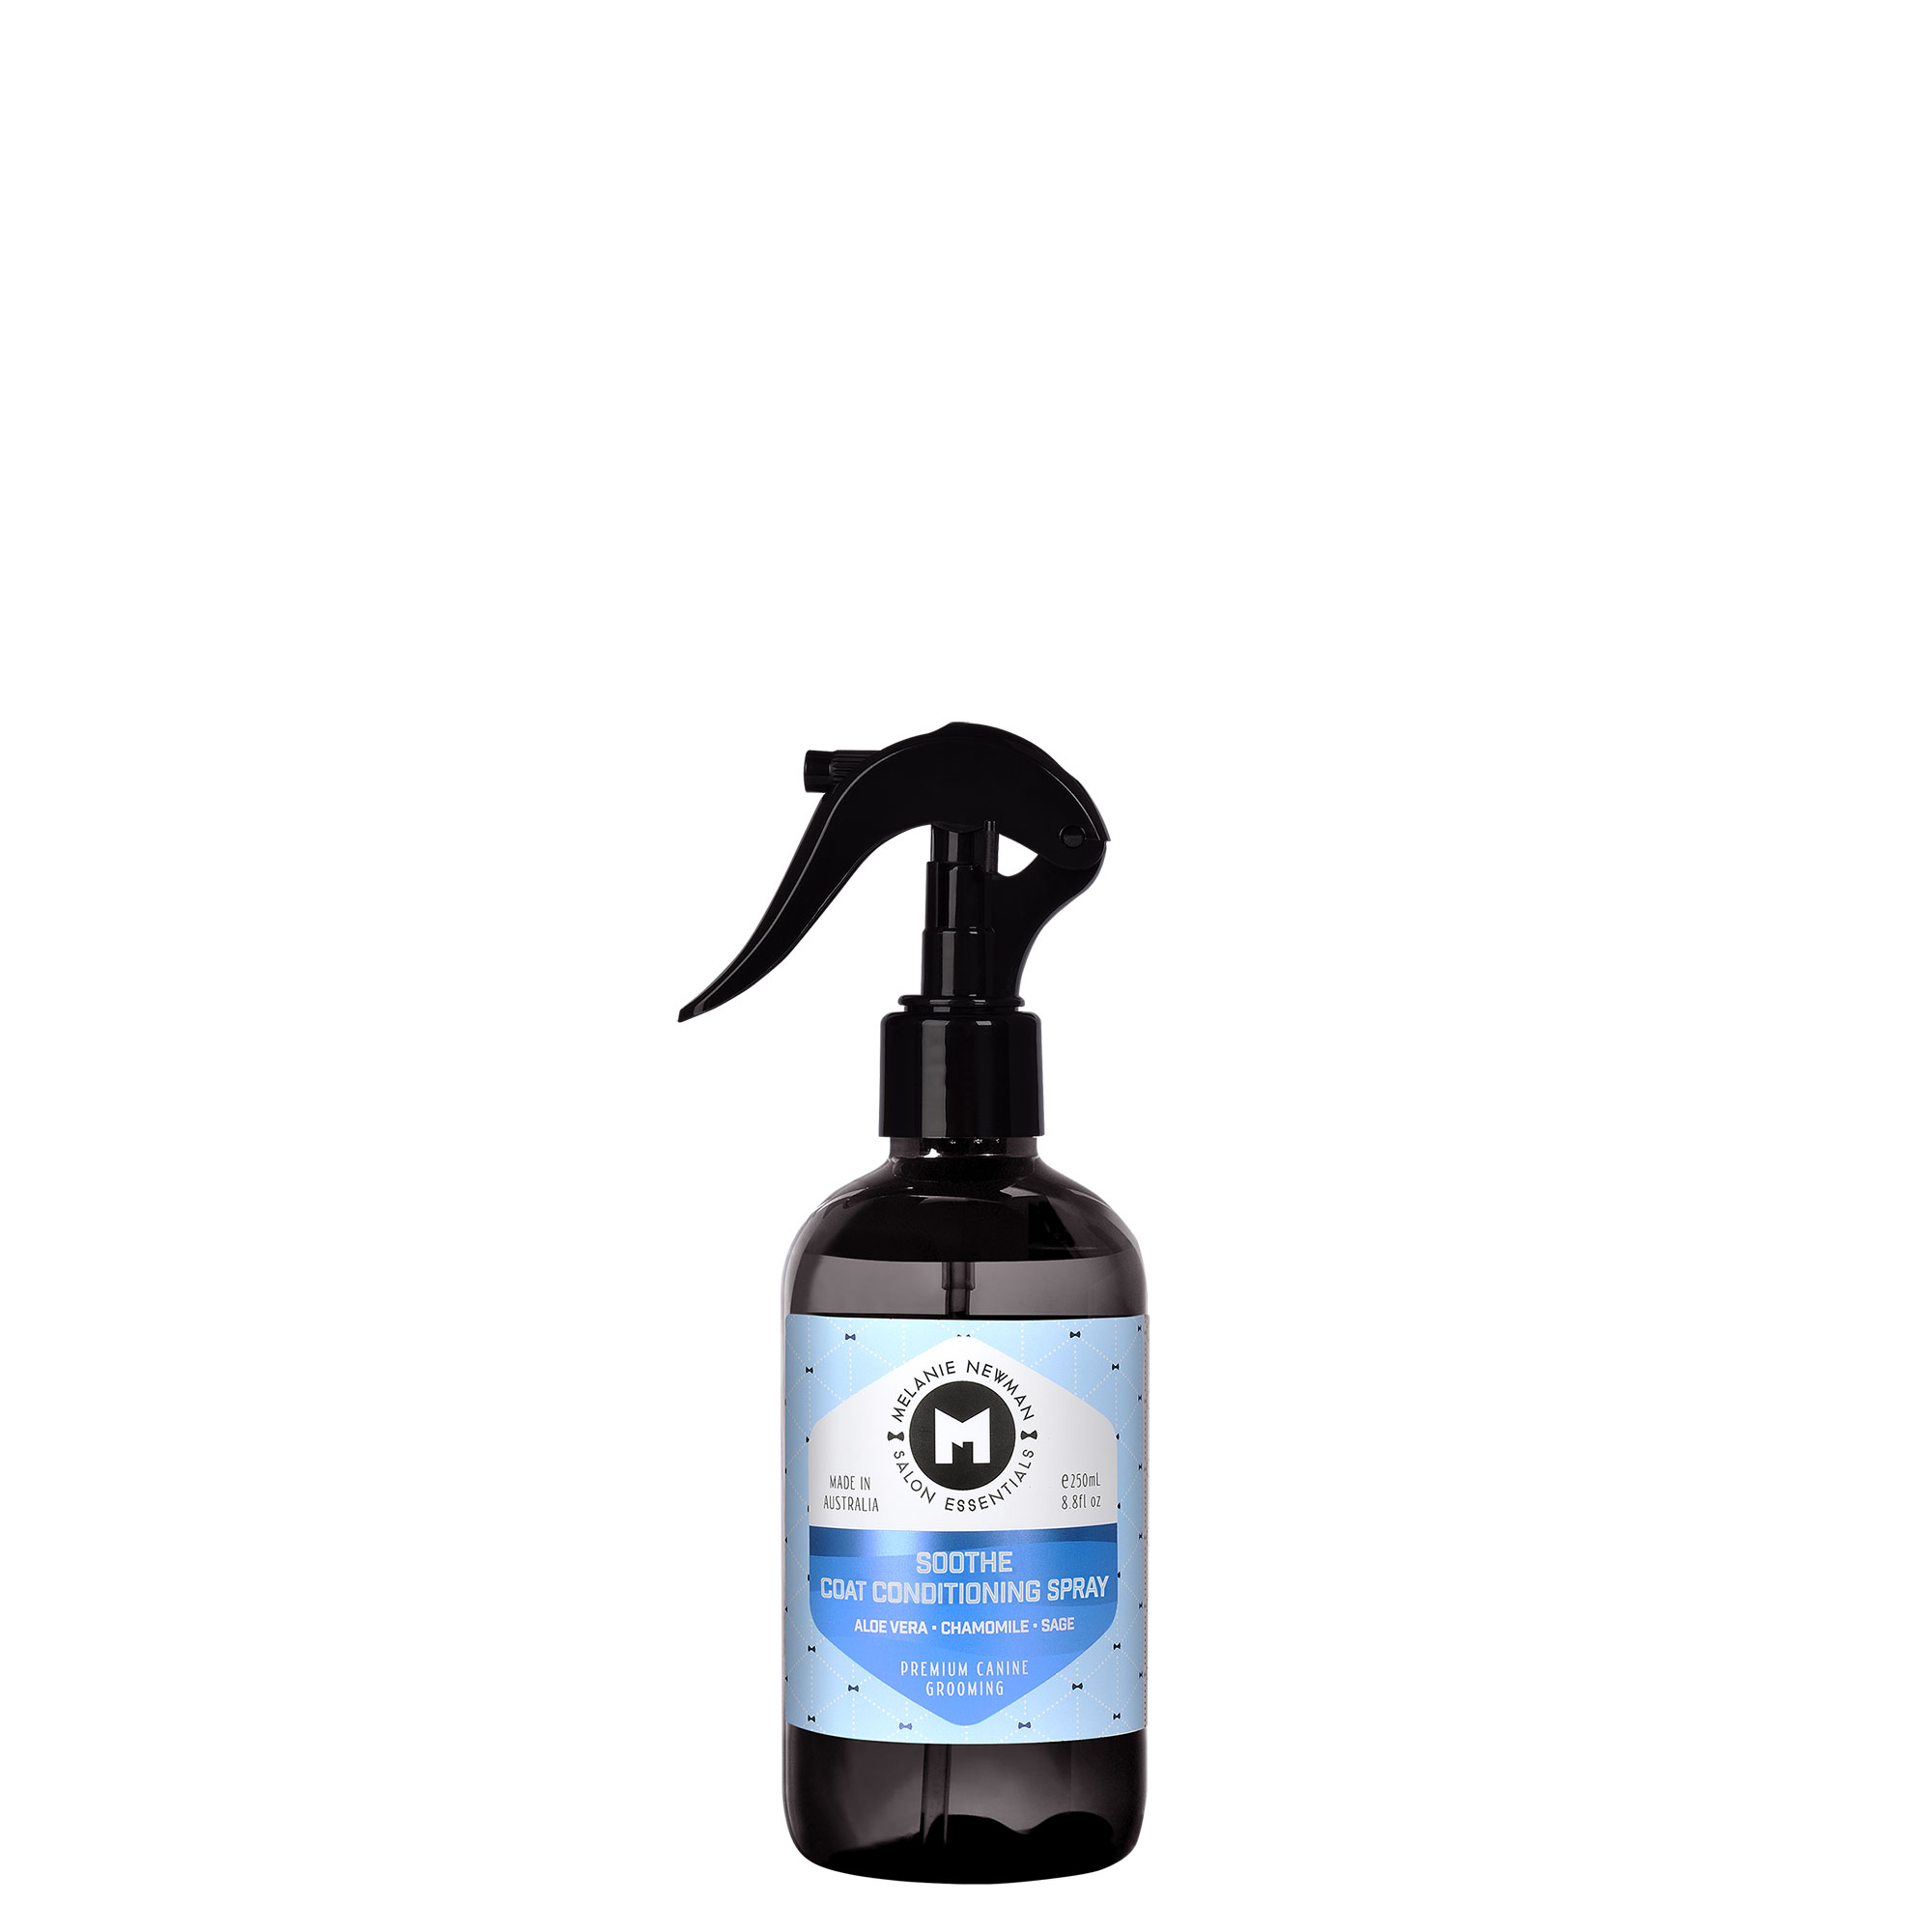 melanie newman soothe conditioning spray 250ml for dog grooming